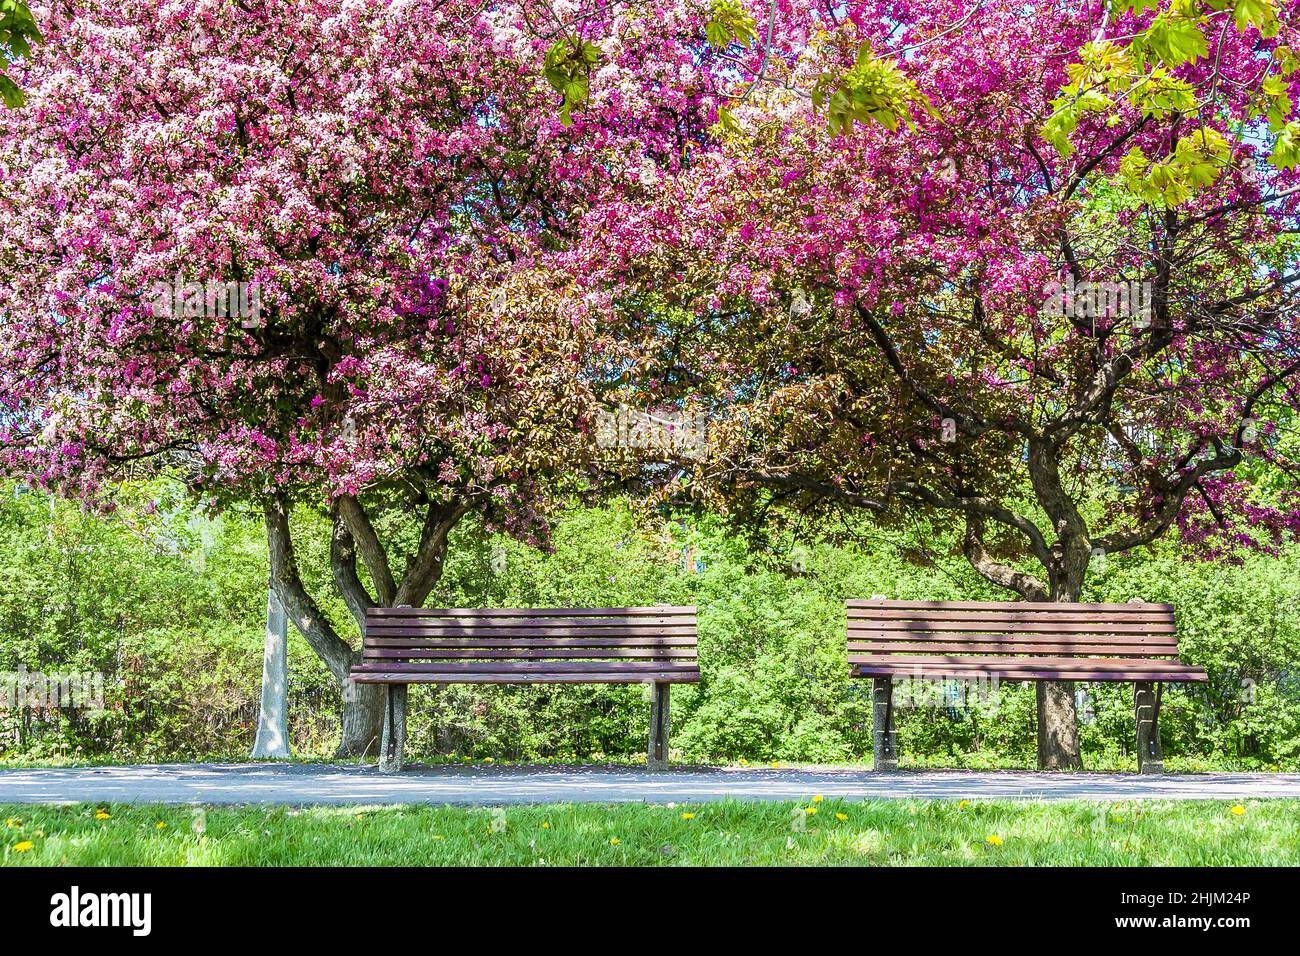 Bench park in front of blossoming crab apple trees Stock Photo